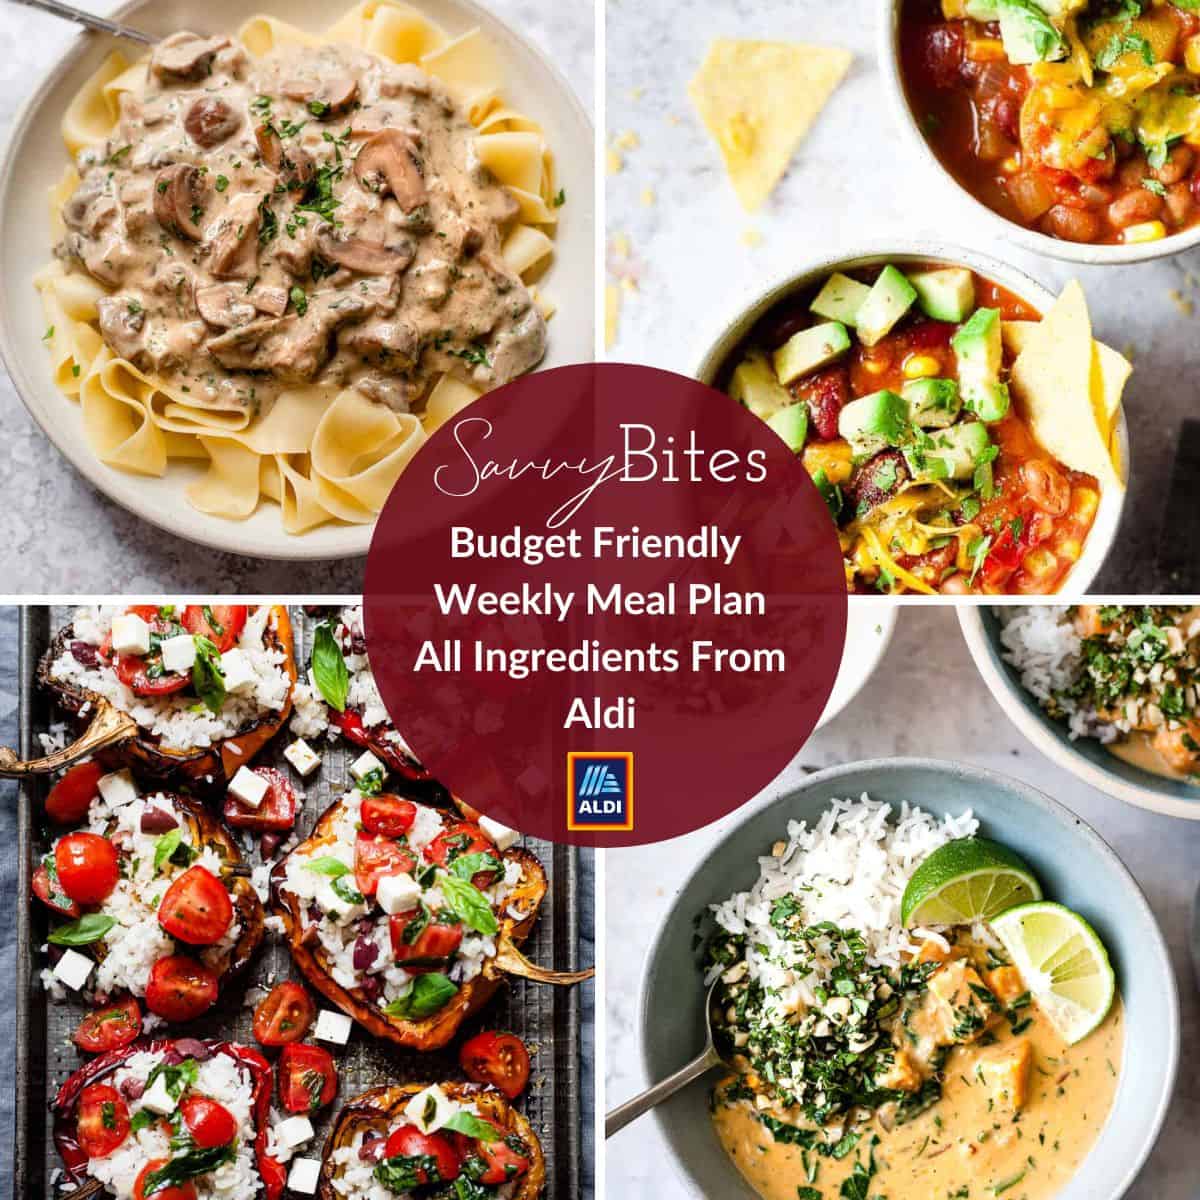 Budget friendly meal plan photo collage.